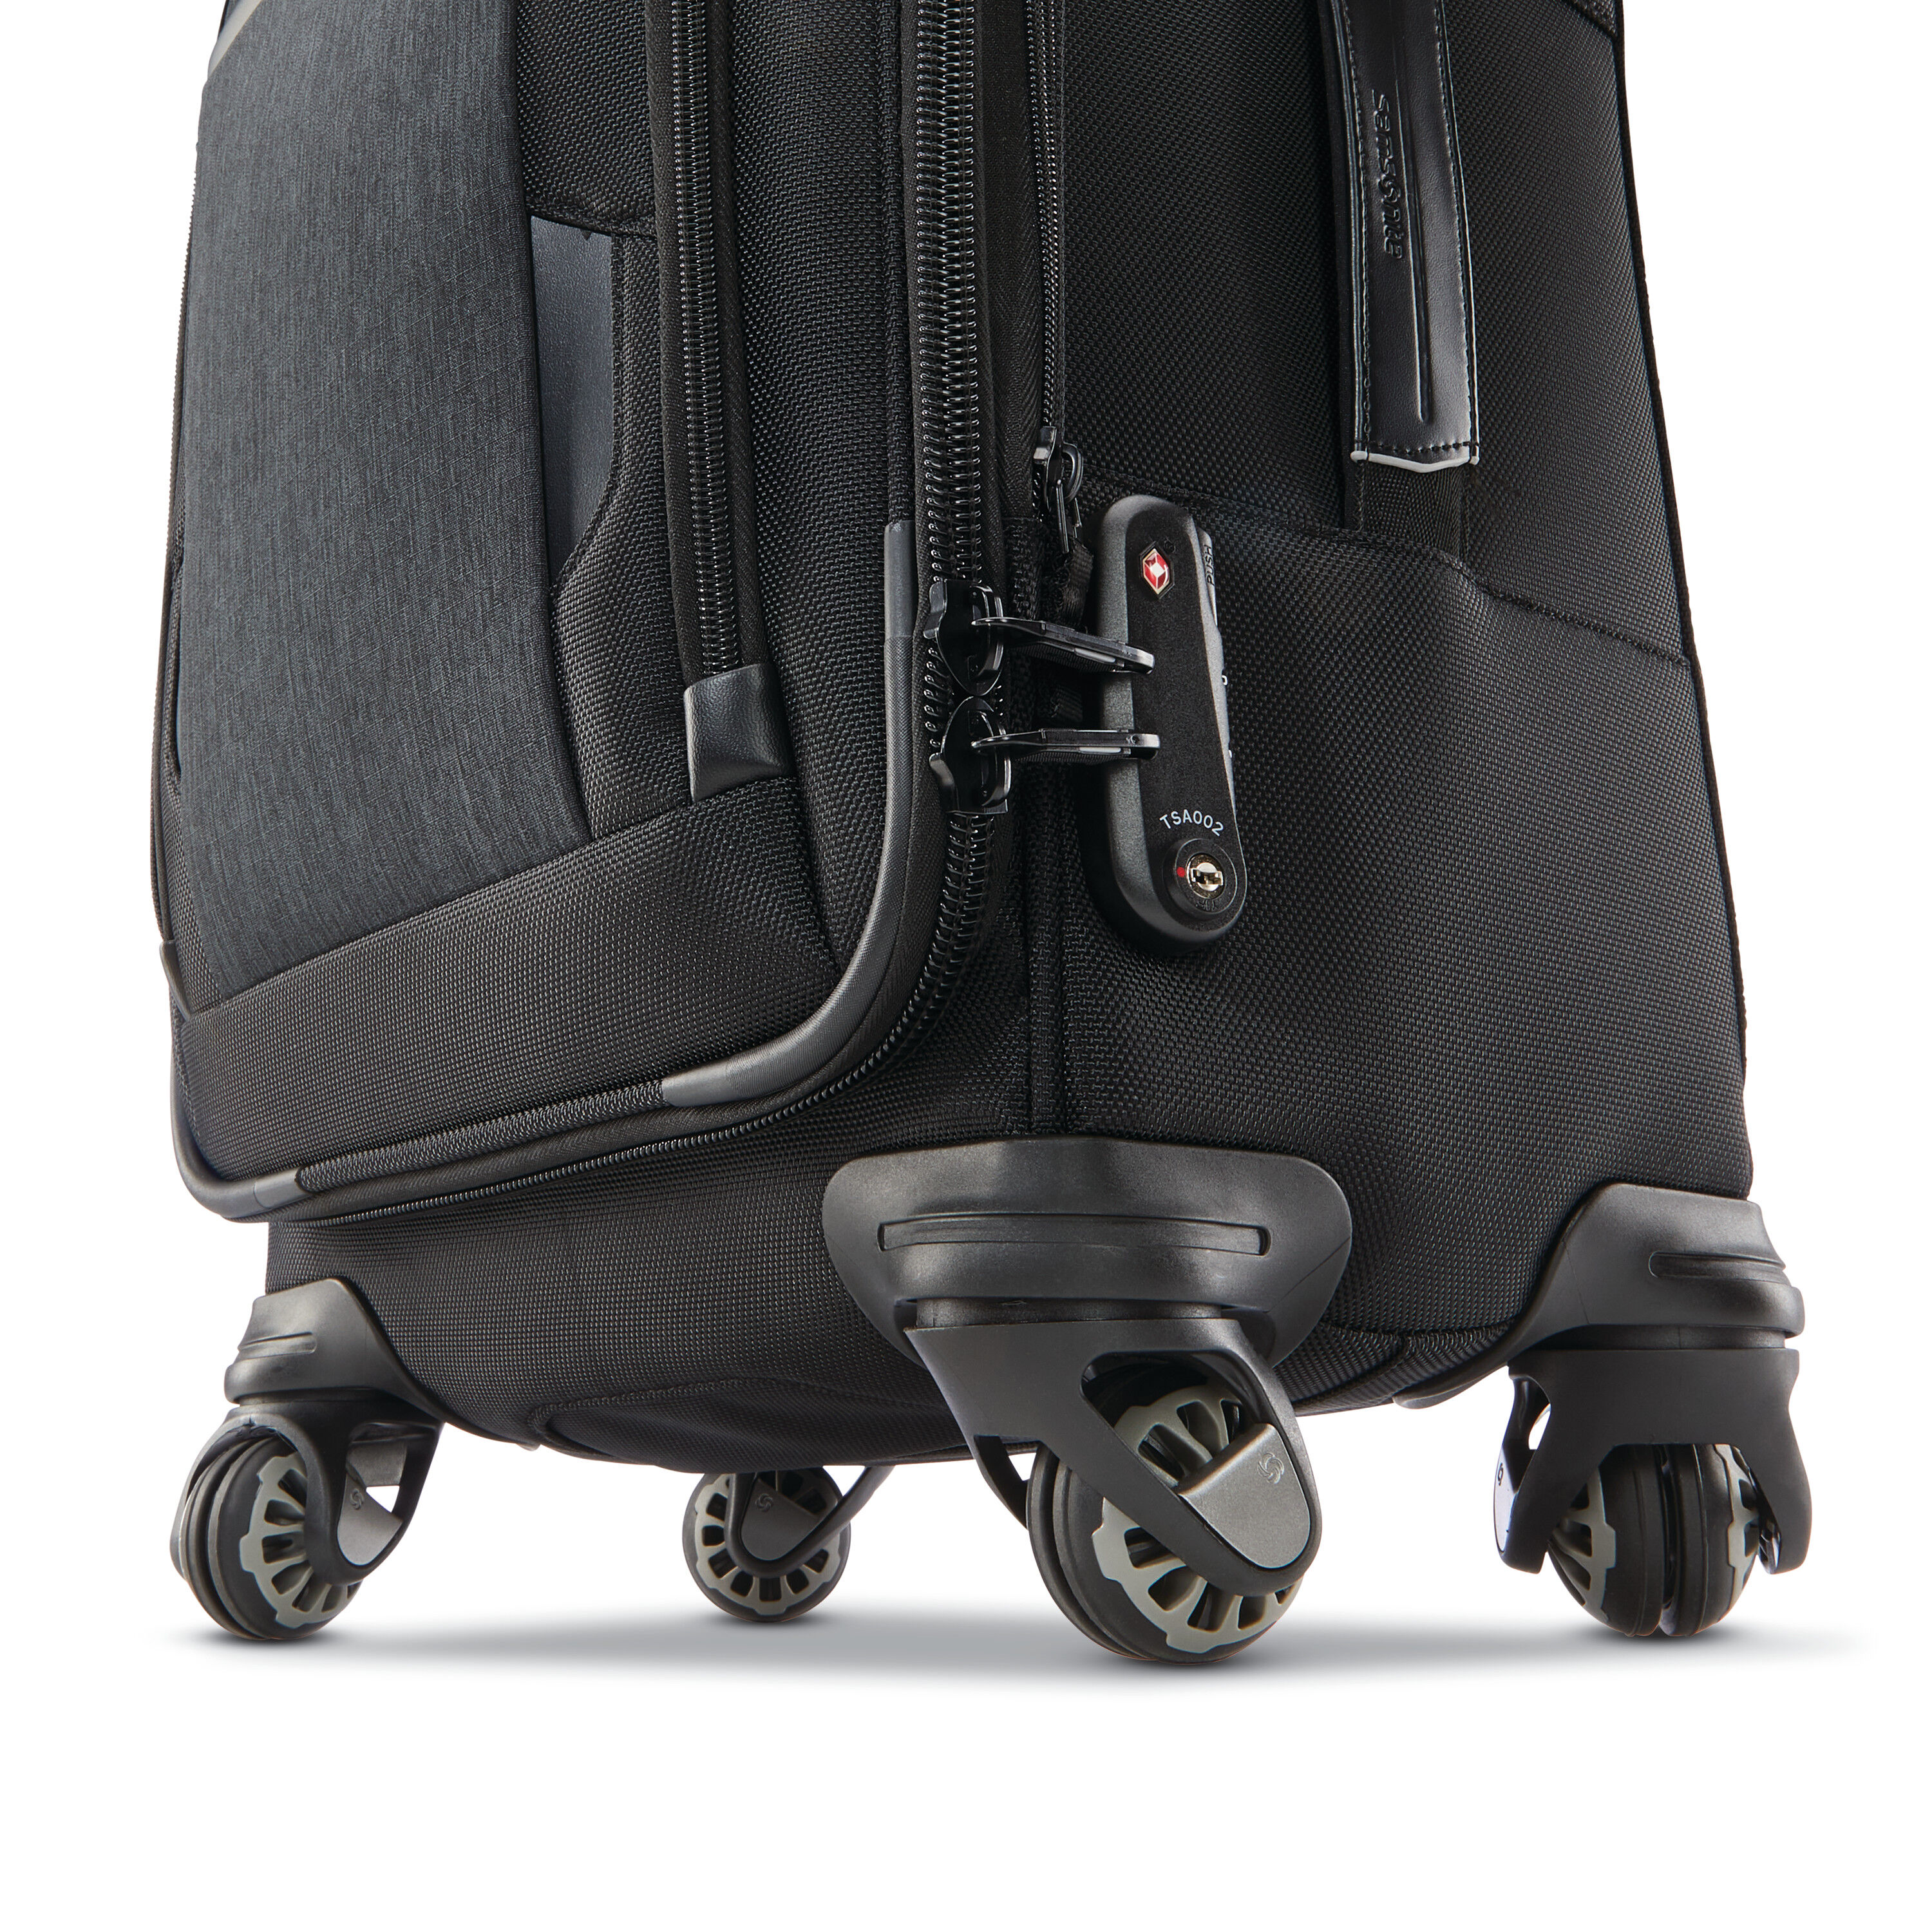 Pro Carry-On Expandable Spinner